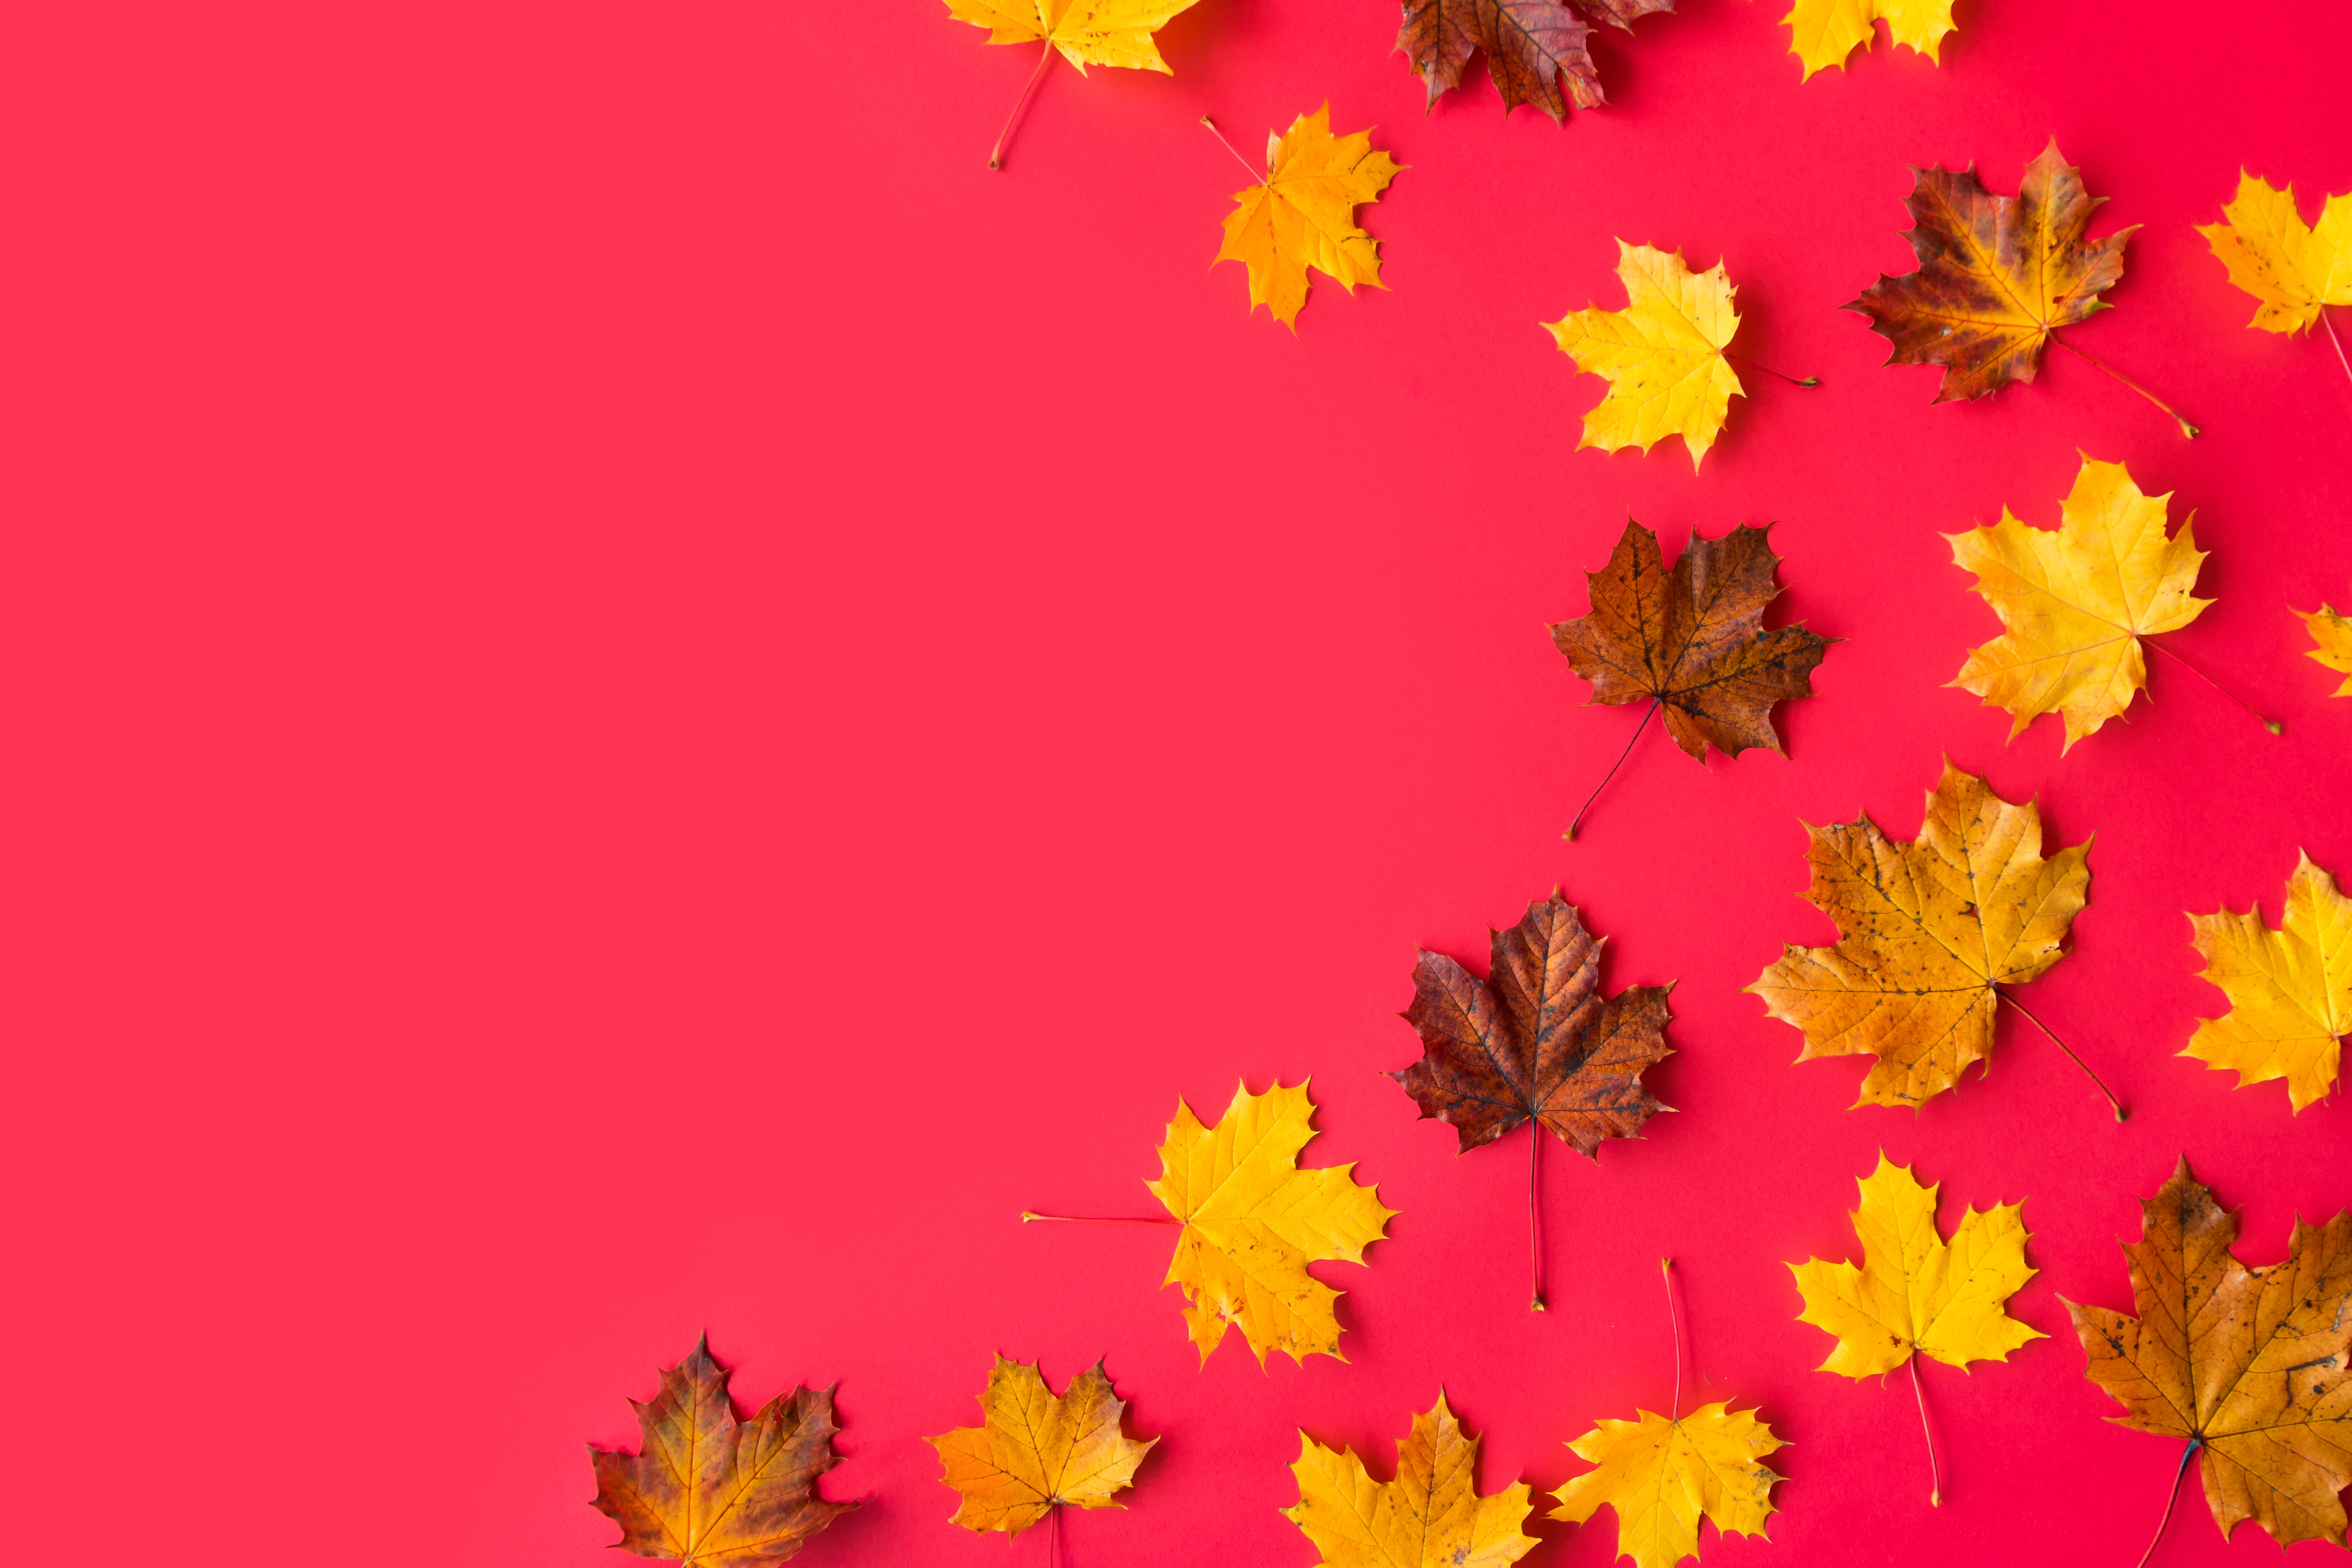 Autumn Leaves on Flat Red Background with Room for Text #2 Free Stock Photo  | picjumbo